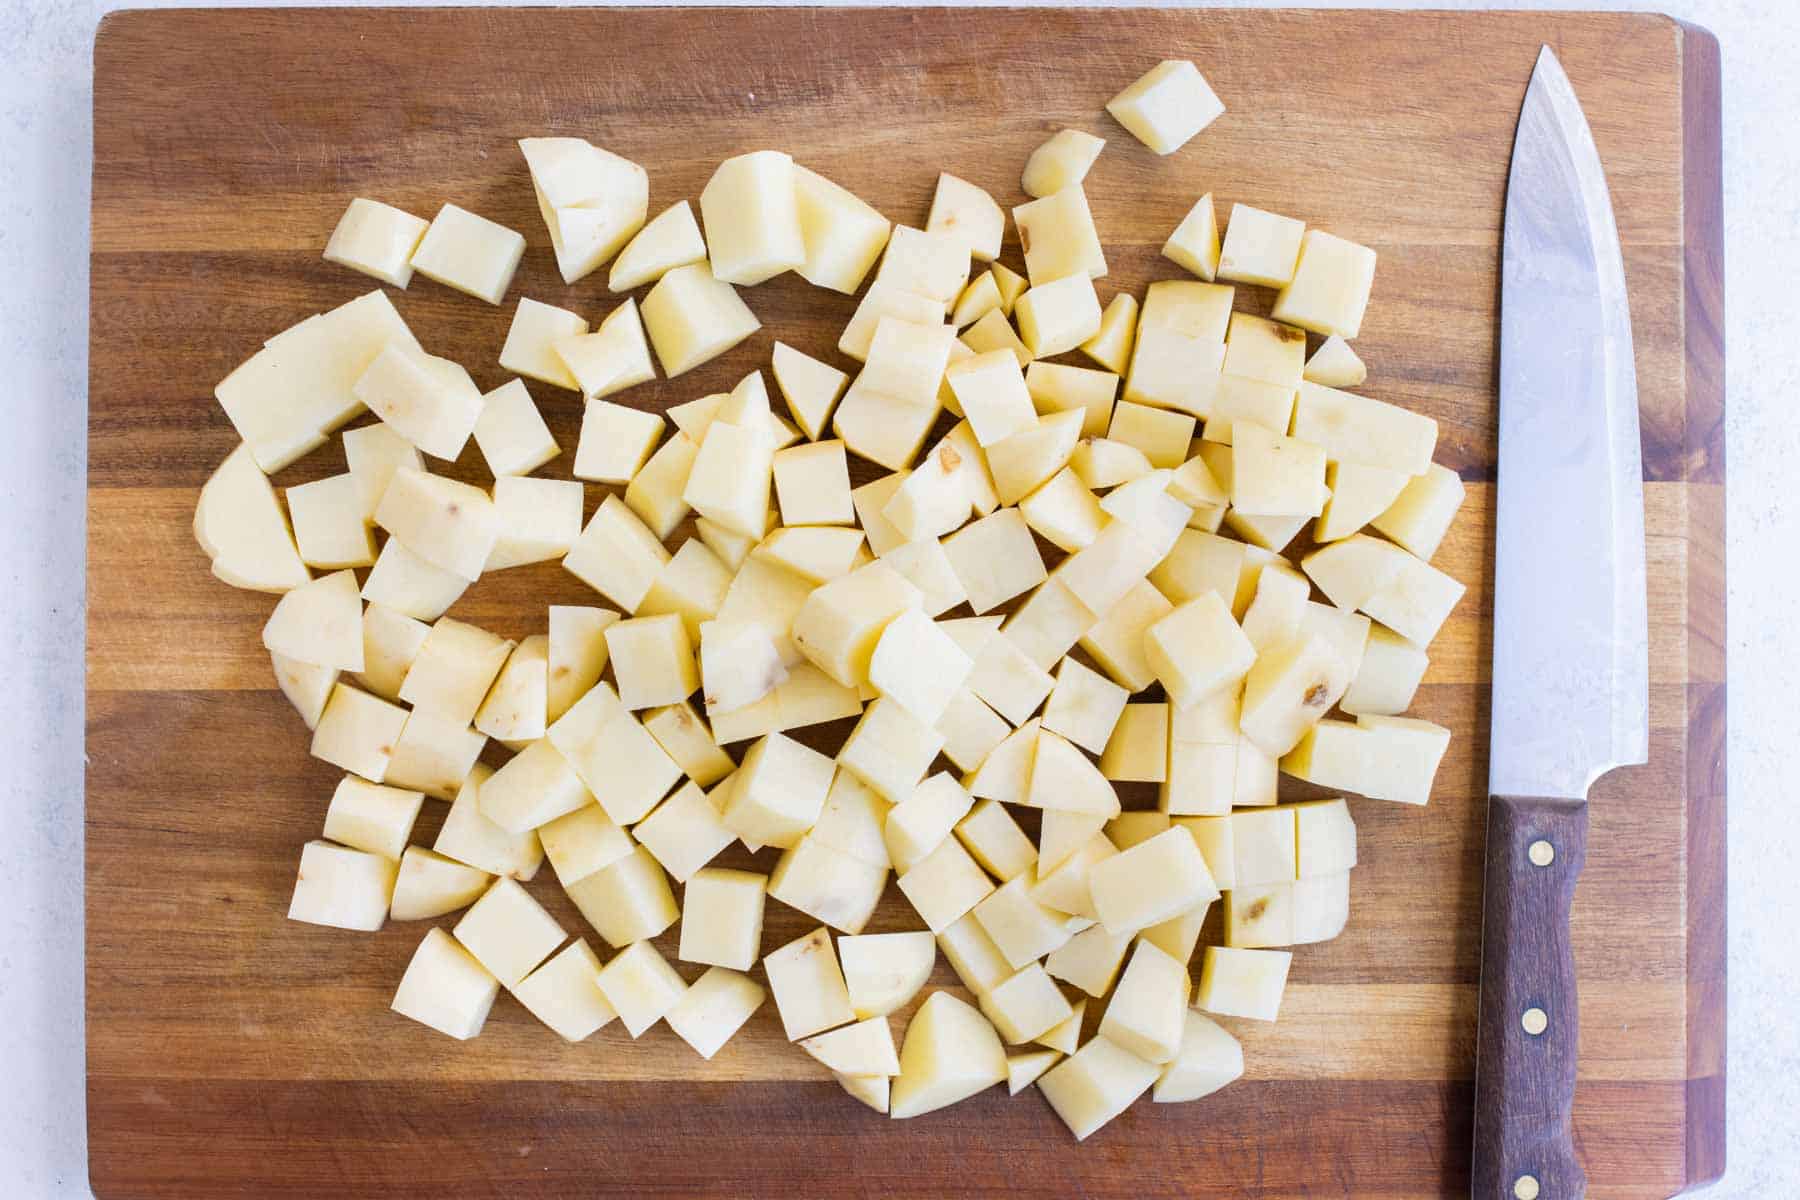 Peeled and cubed potatoes on a cutting board.